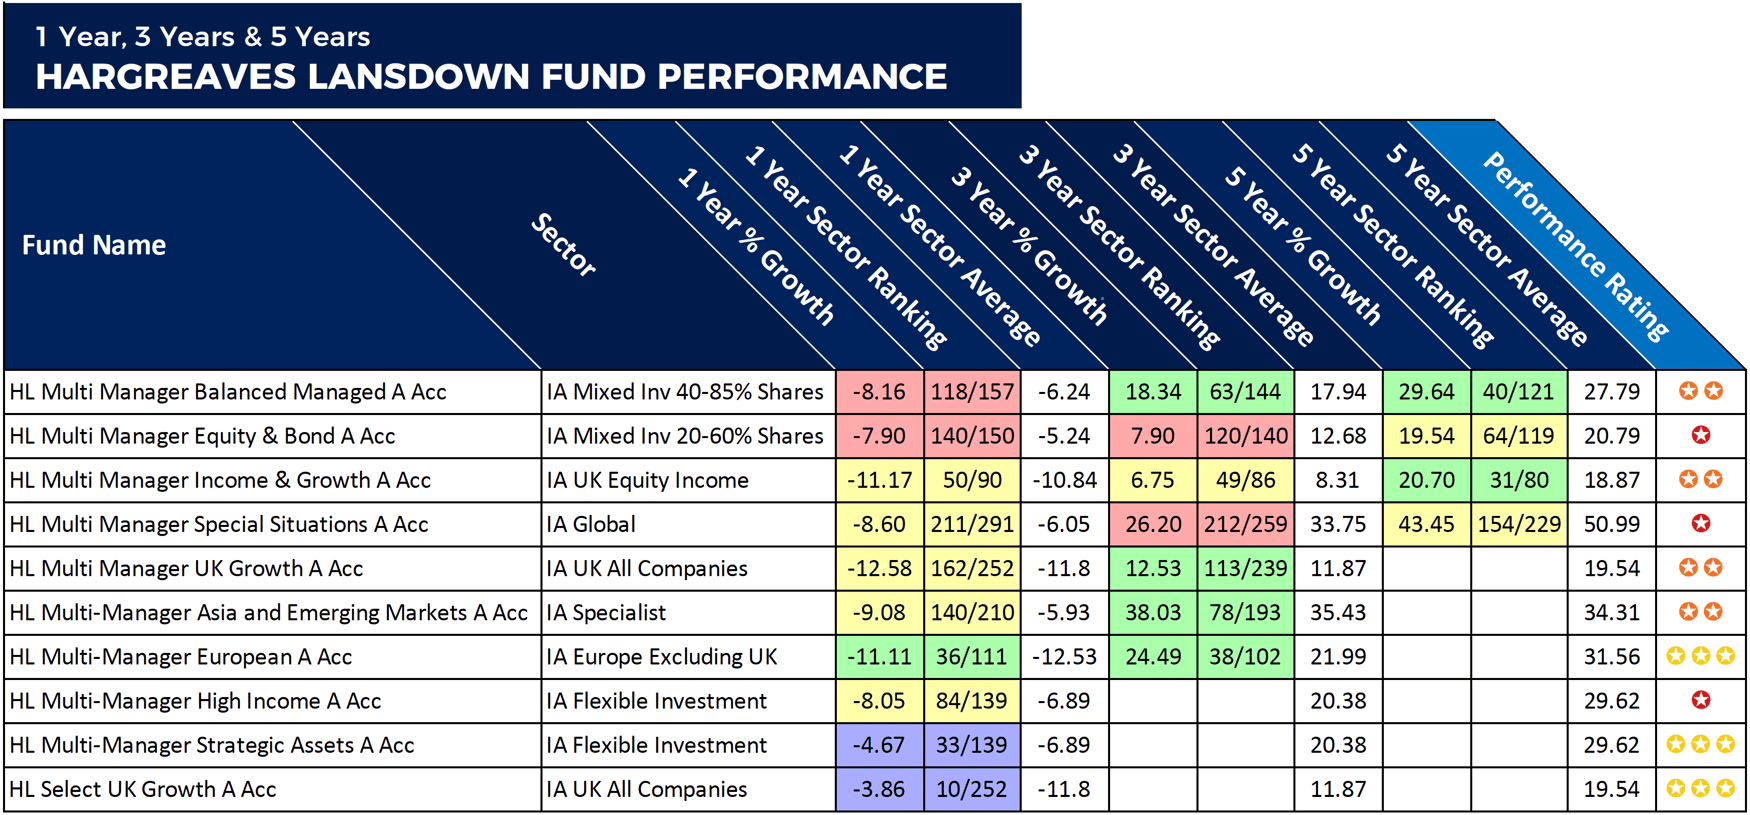 Hargreaves Lansdown Fund Review 2019